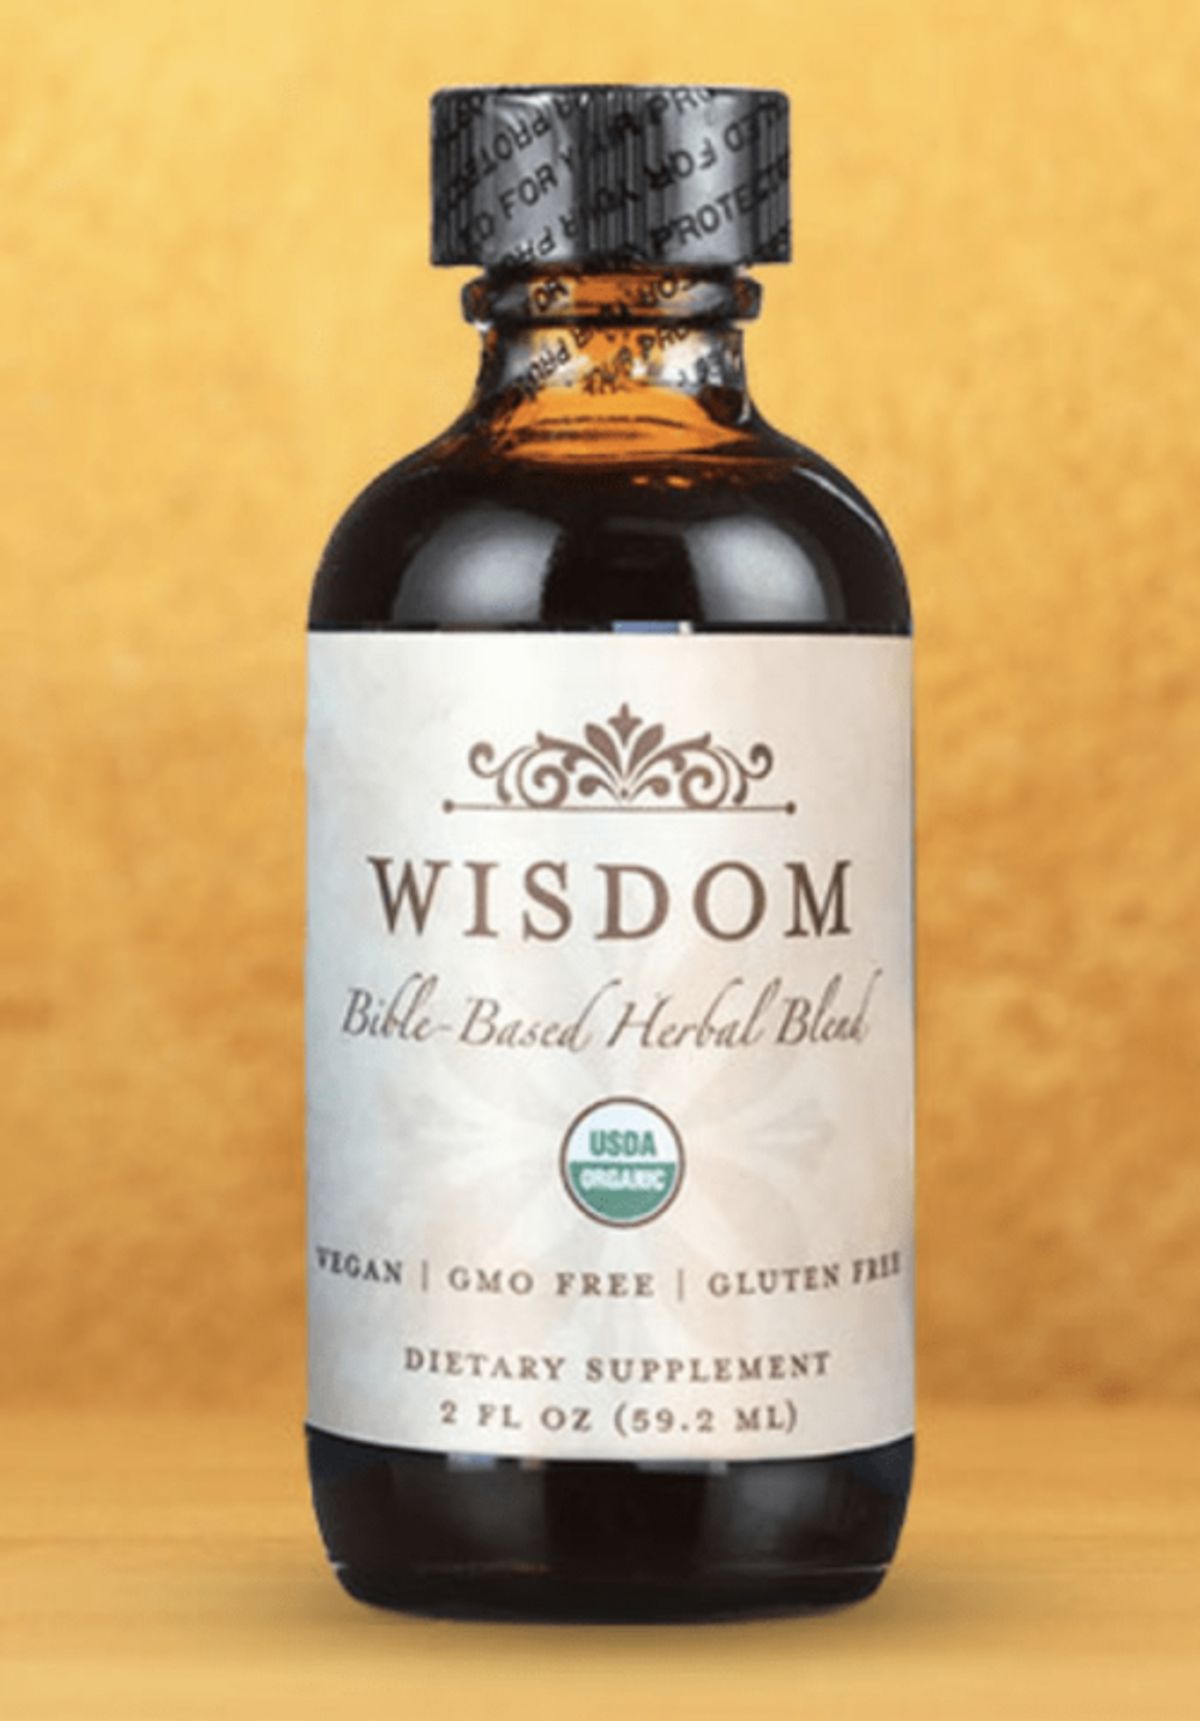 Top Wisdom Heal Reviews: How Consumers Compare Their Experiences